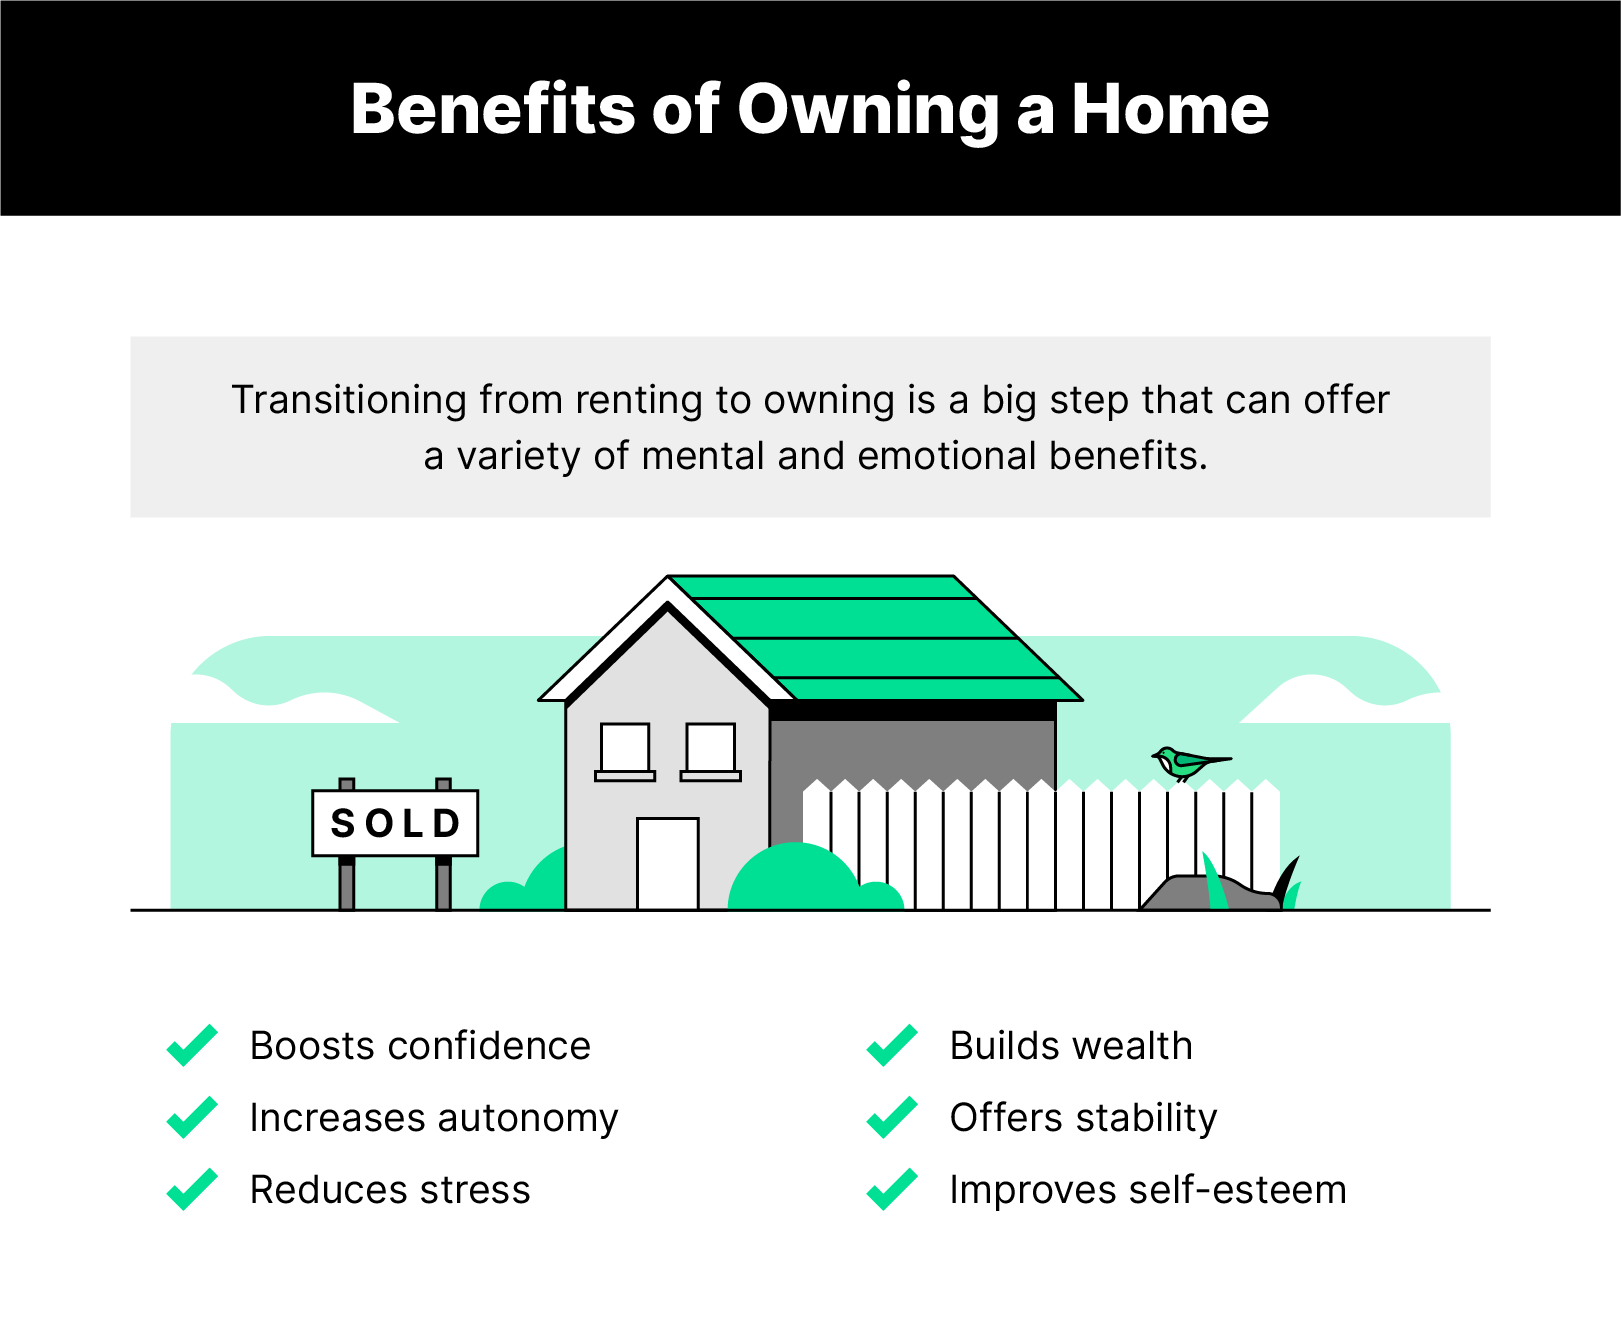 Illustration of a home with a fence and "sold" sign with the benefits listed below